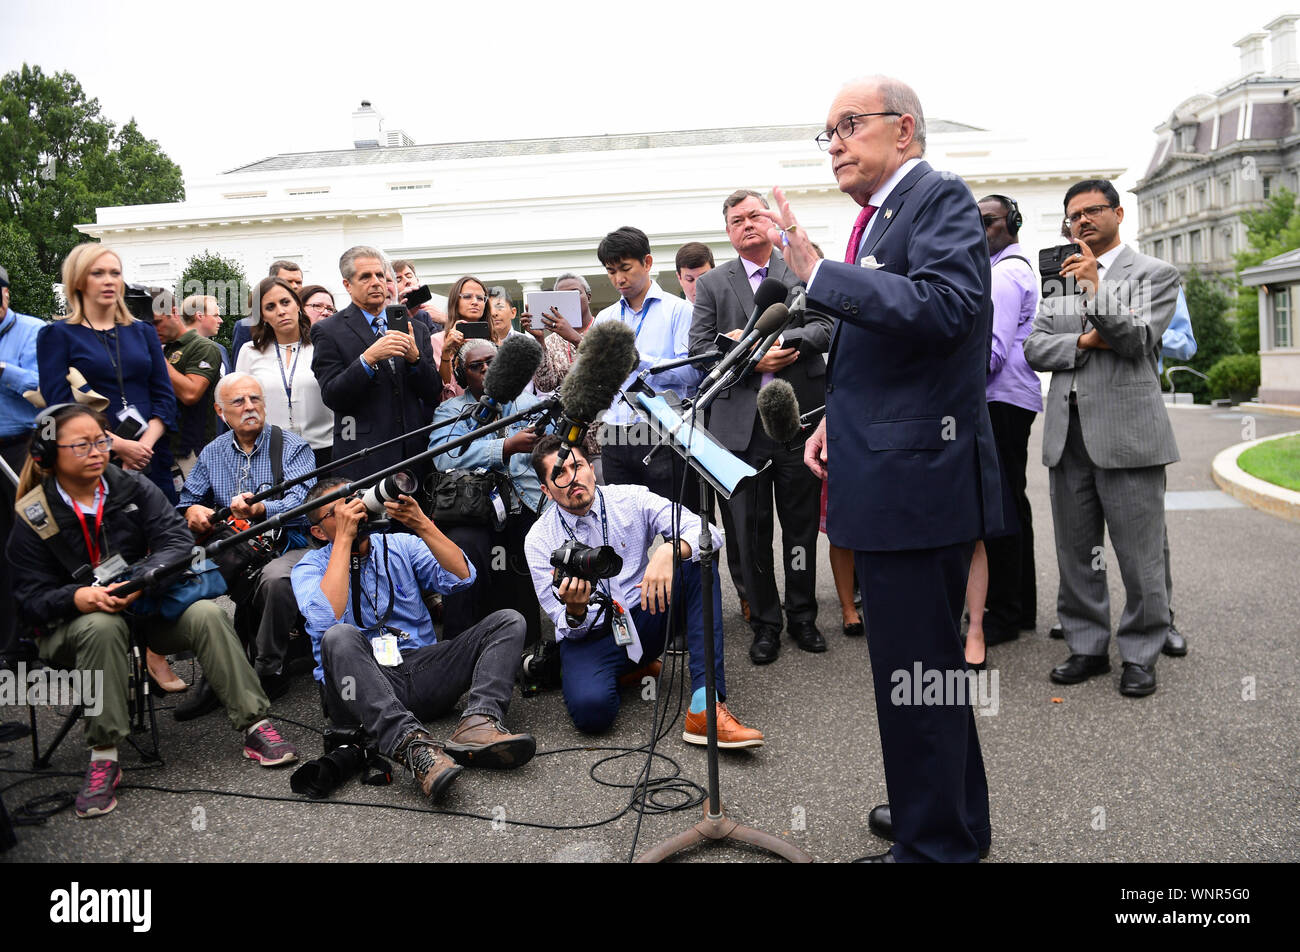 Washington DC, USA. 6th Sept 2019. Larry Kudlow, Director of the National Economic Council, speaks to members of the media at the White House in Washington, DC on Friday, September 6, 2019. Photo by Kevin Dietsch/UPI Credit: UPI/Alamy Live News Stock Photo